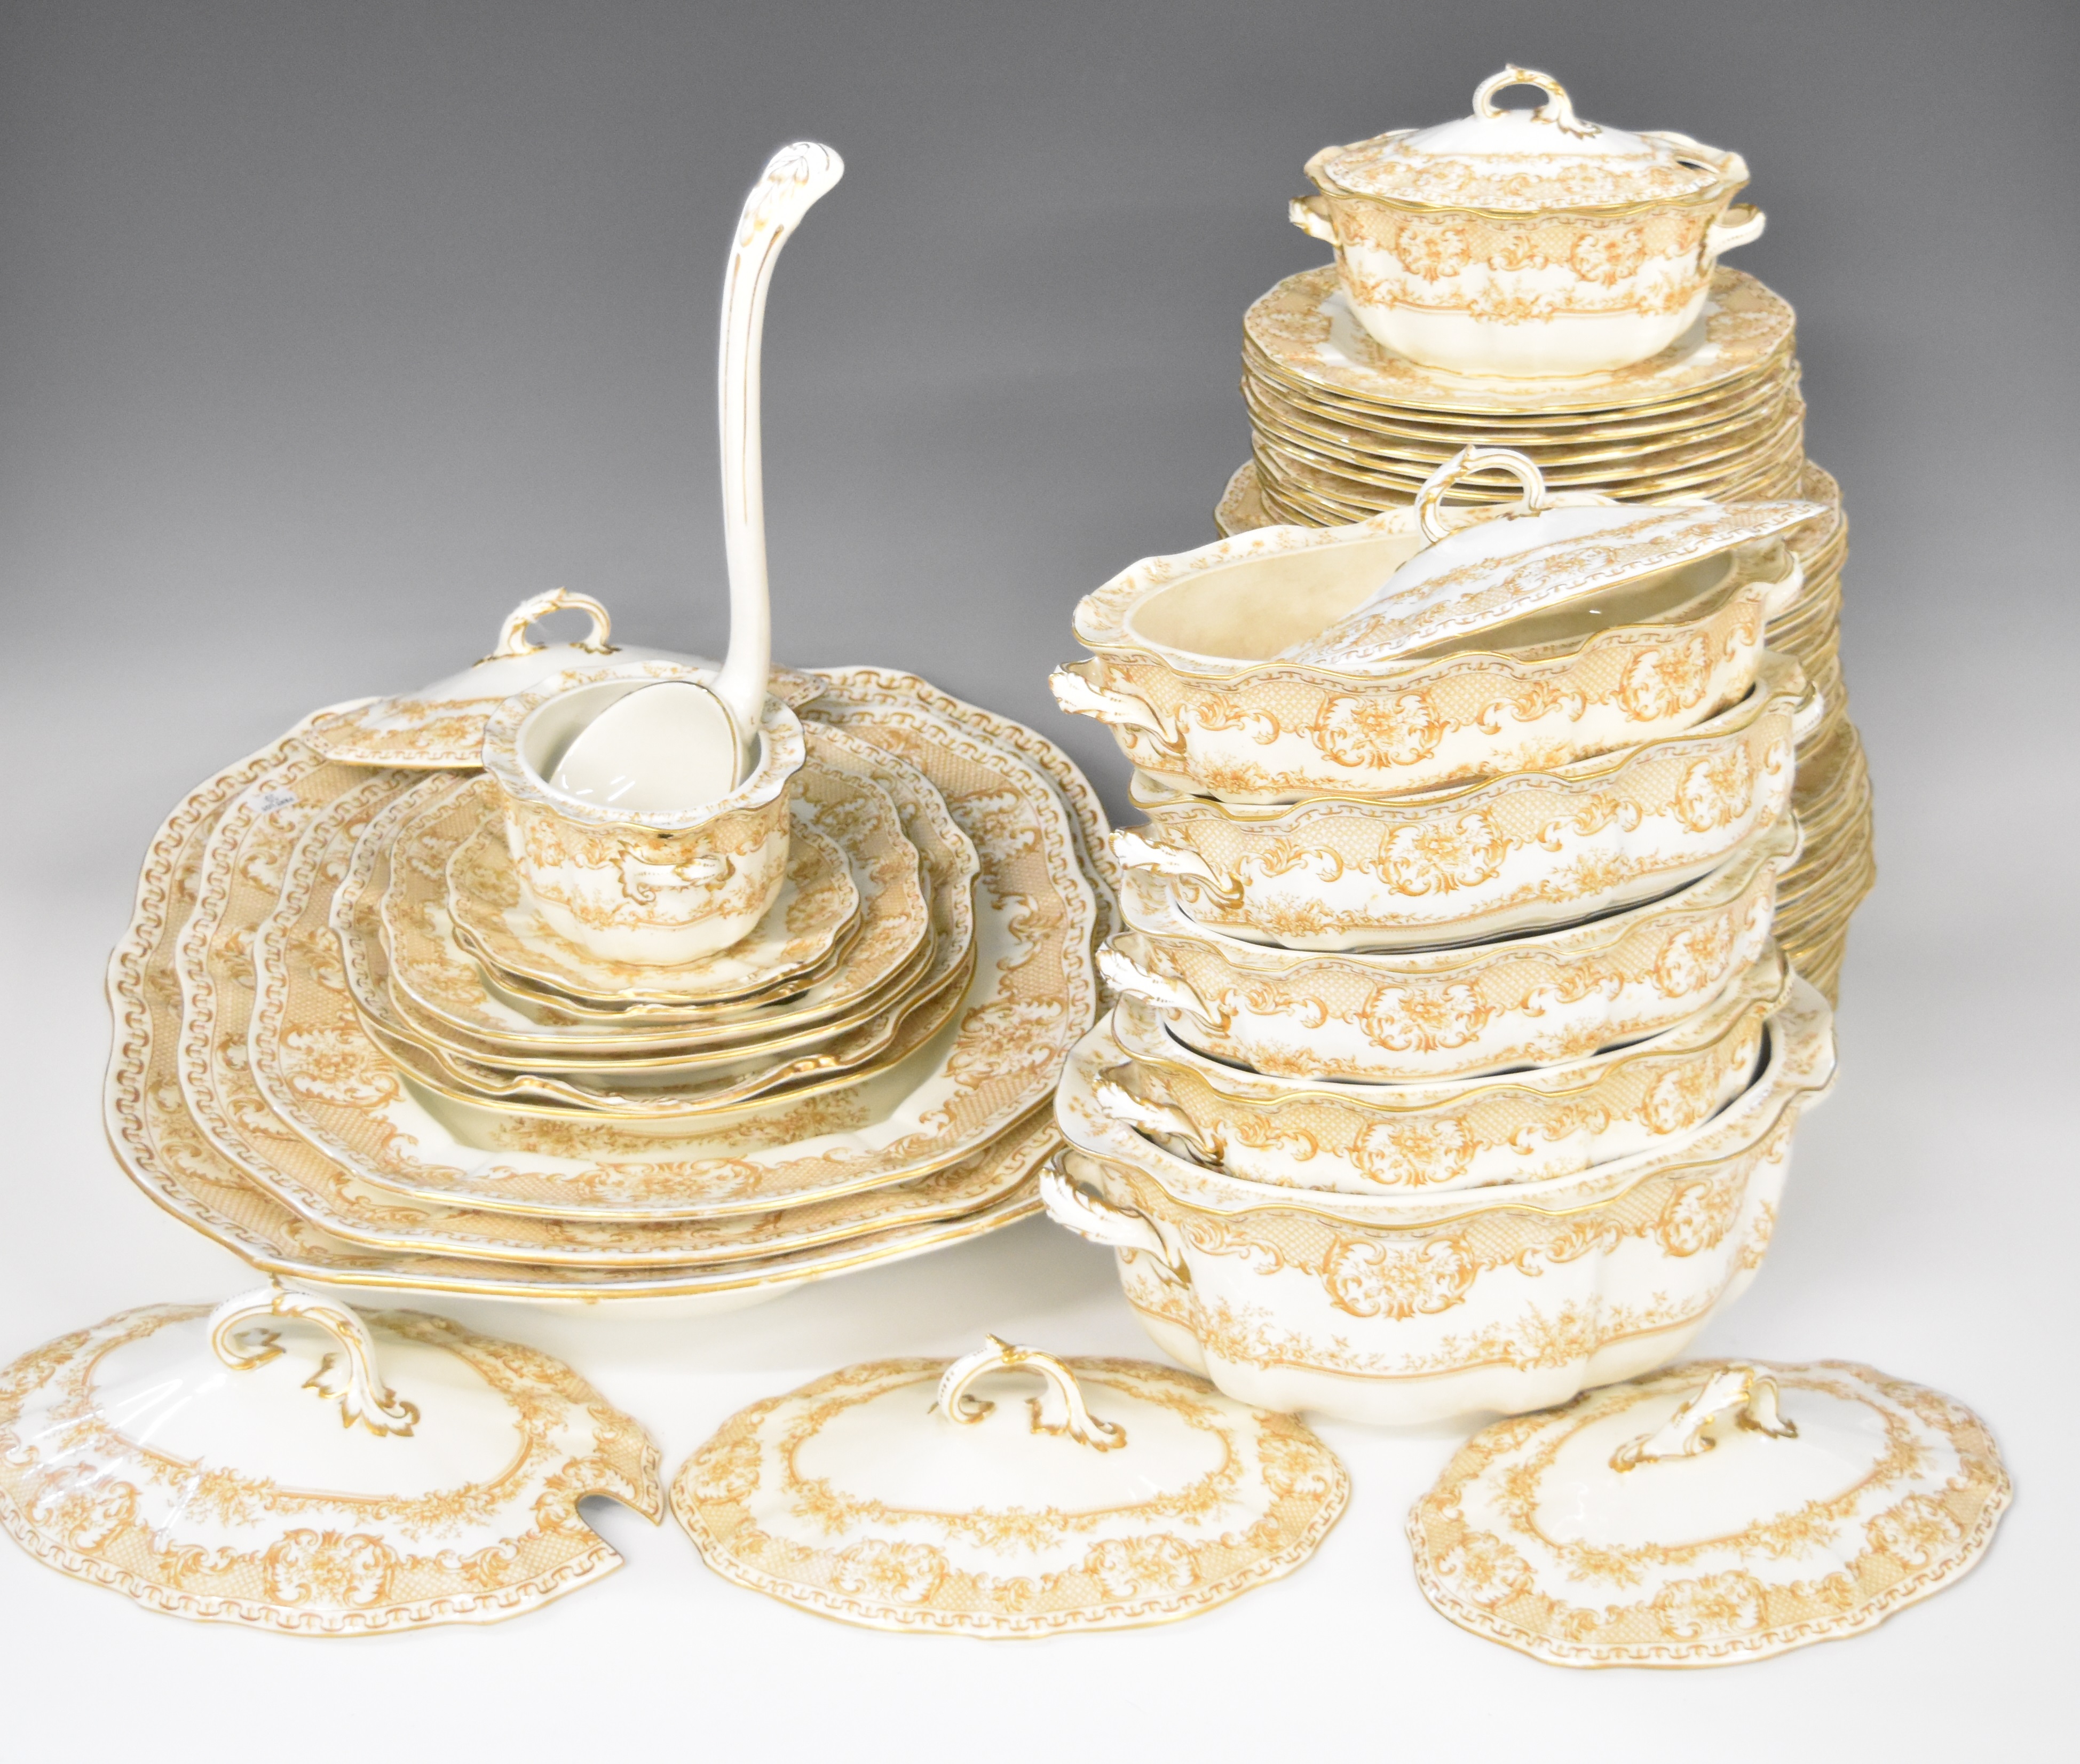 Royal Crown Derby dinner service including tureens, dinner plates and graduated meat plates, - Image 8 of 14